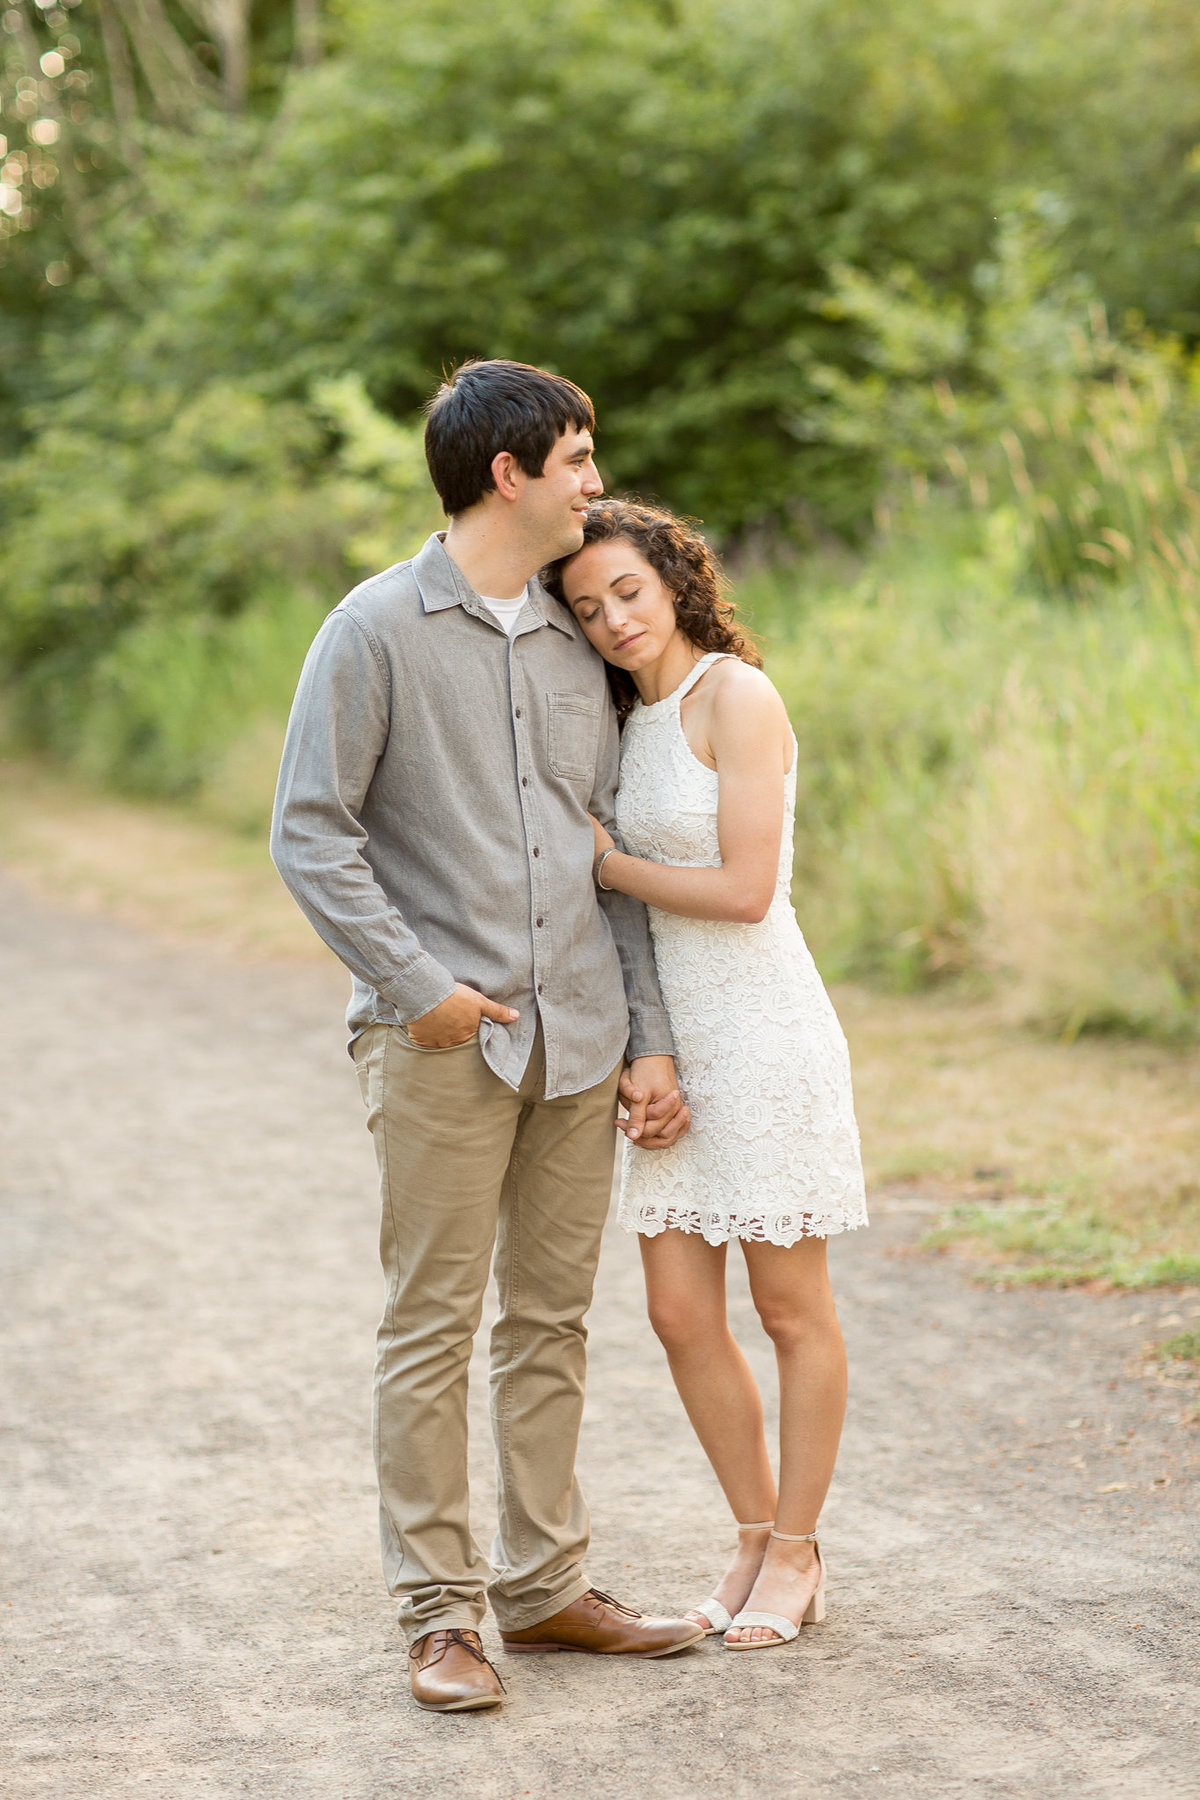 Blake & Annie | Previews | Emily Moller Photography (4 of 5)